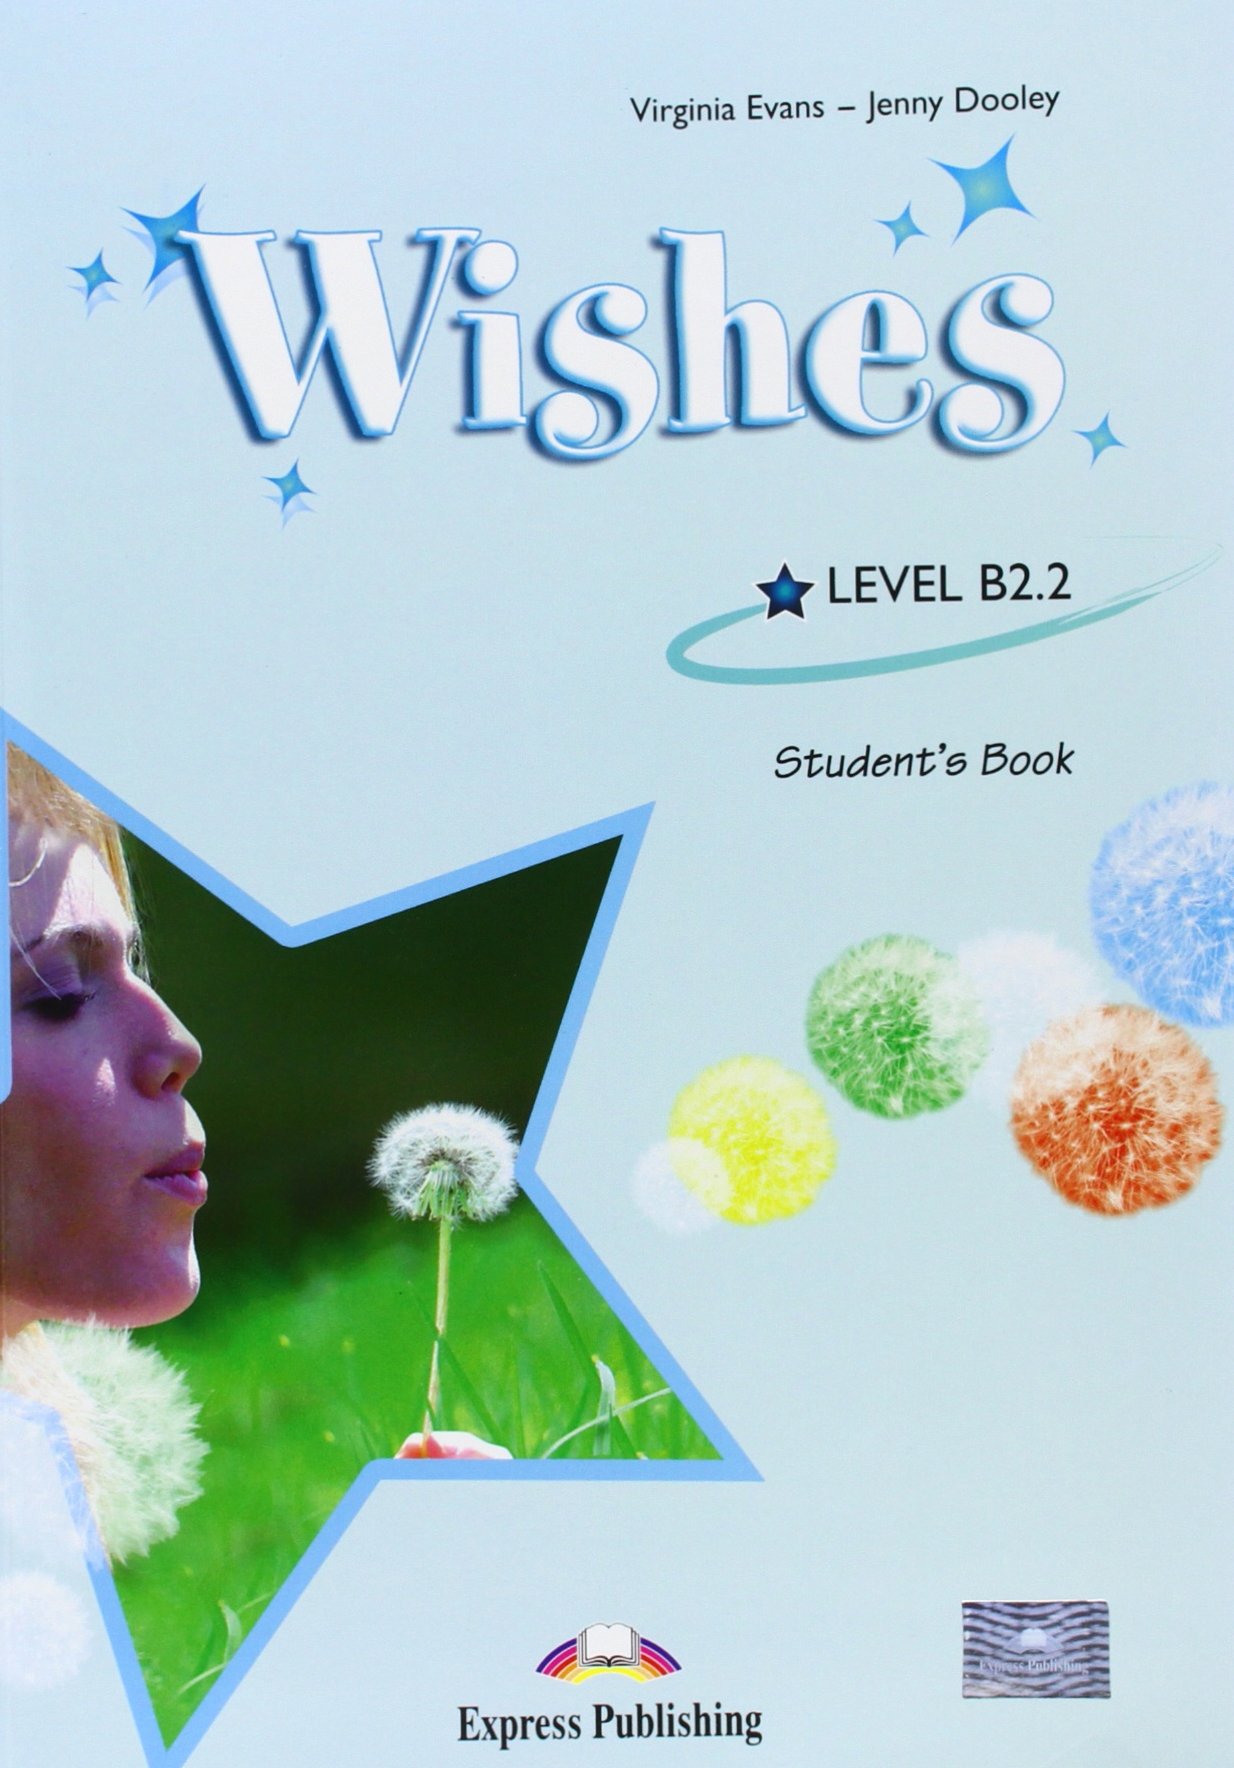 WISHES B2.2 Student's Book.